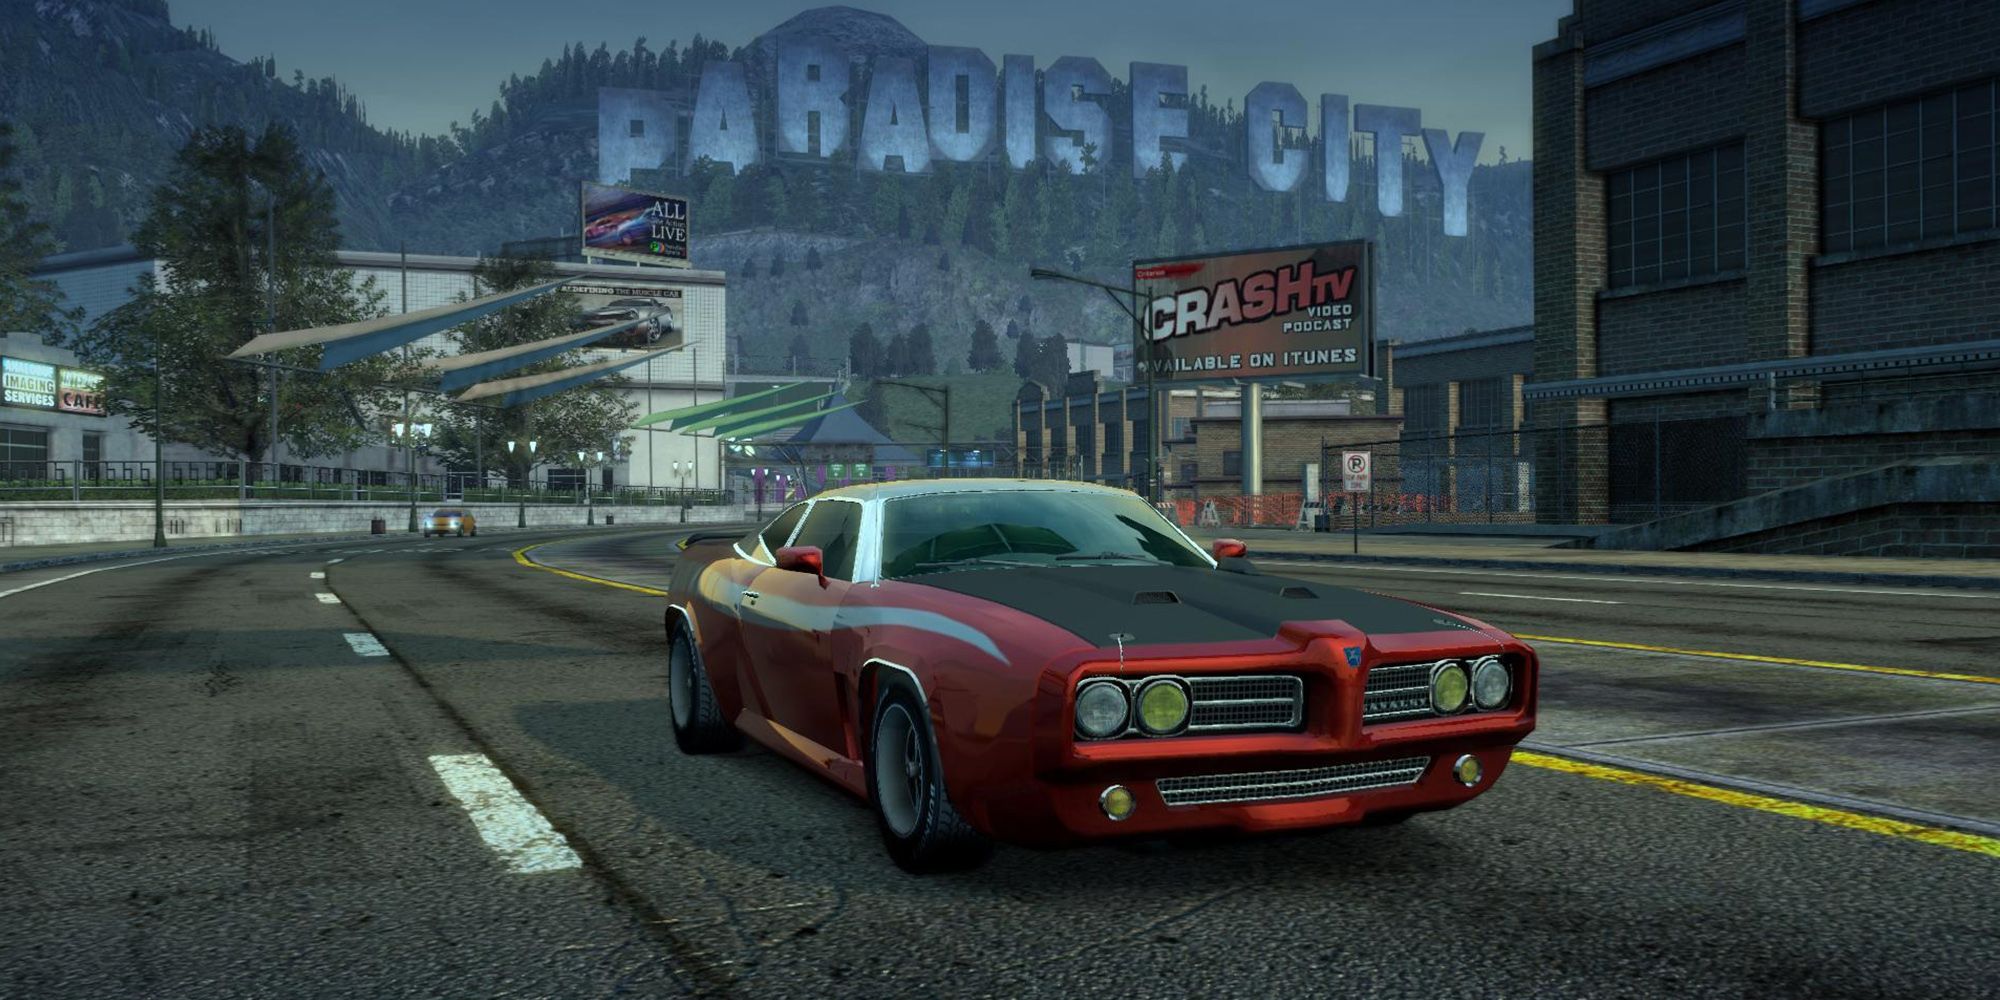 Screenshot From Burnout Paradise Showing The Paradise City Sign In The Background